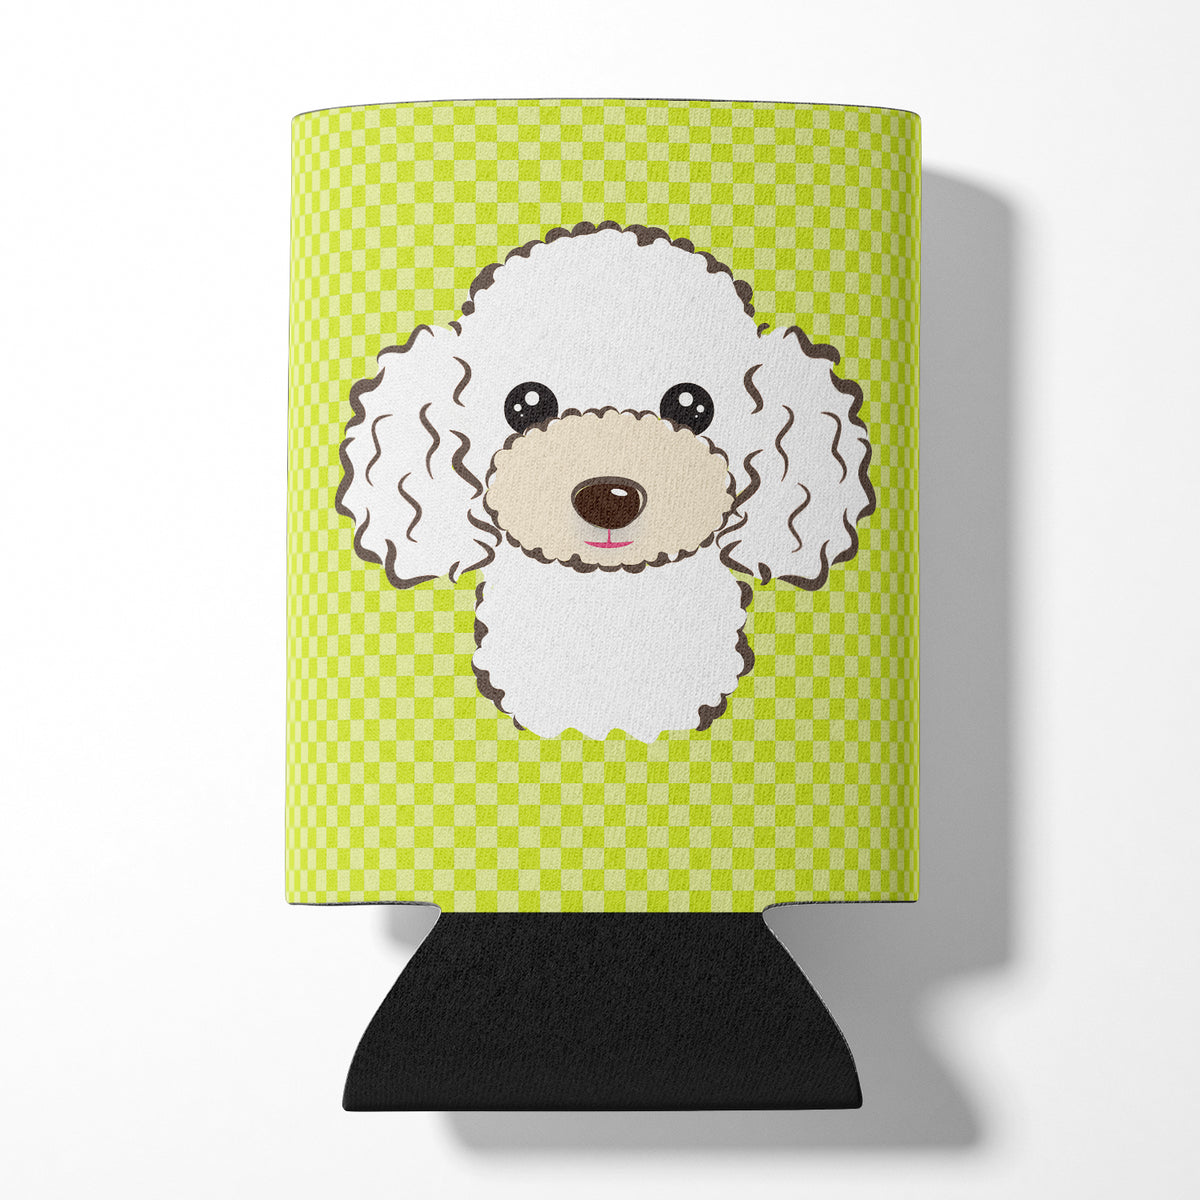 Checkerboard Lime Green White Poodle Can or Bottle Hugger BB1319CC.